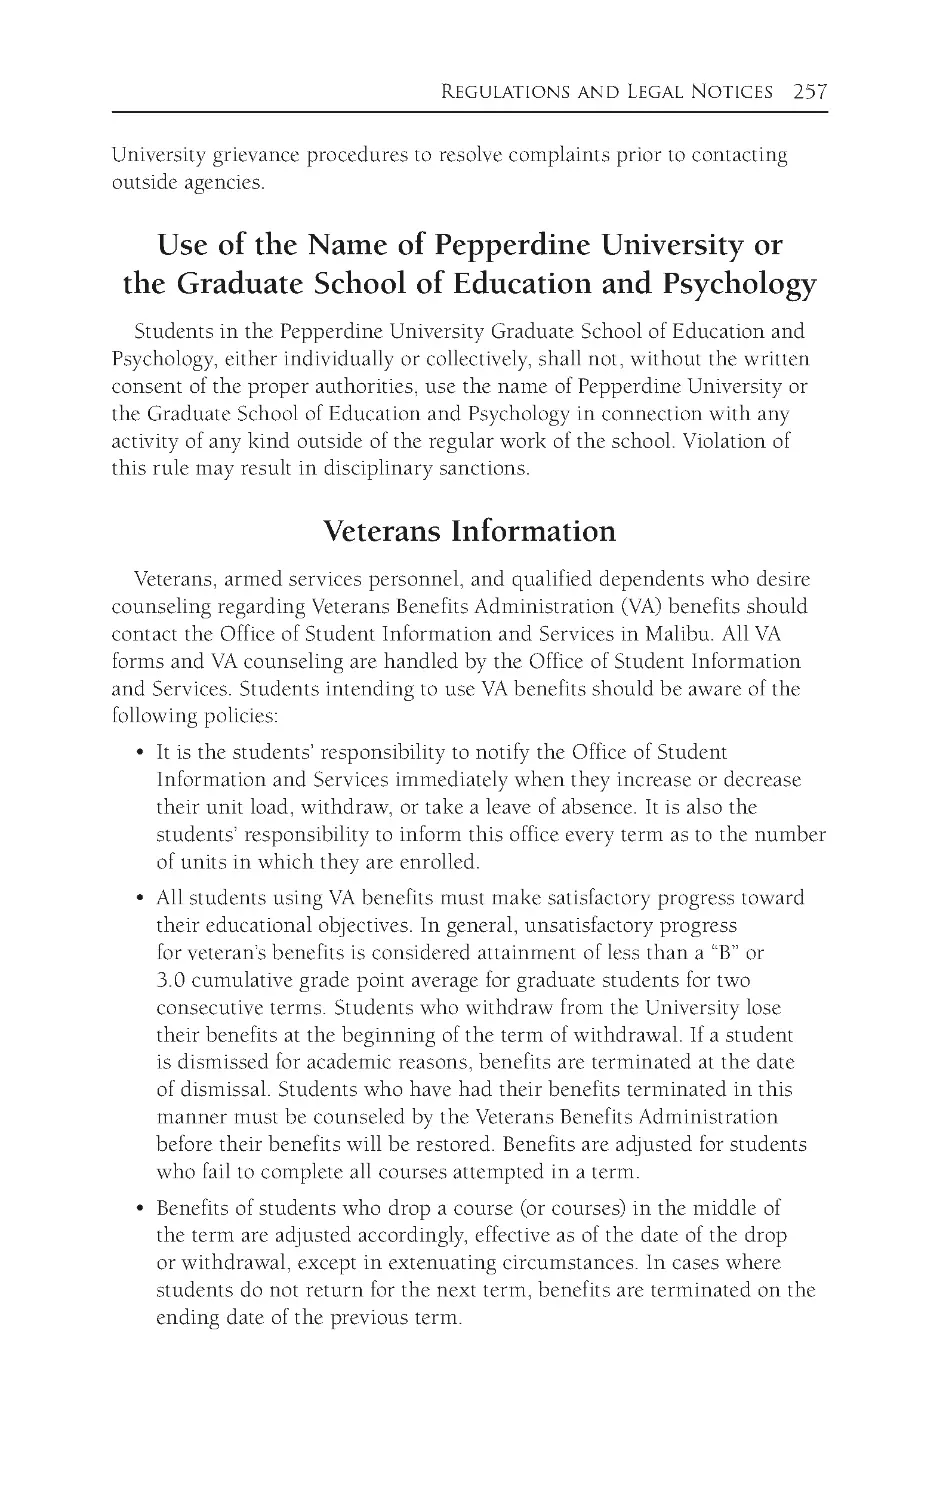 Use of the Name of Pepperdine University or the Graduate School of Education and Psychology
Veterans Information